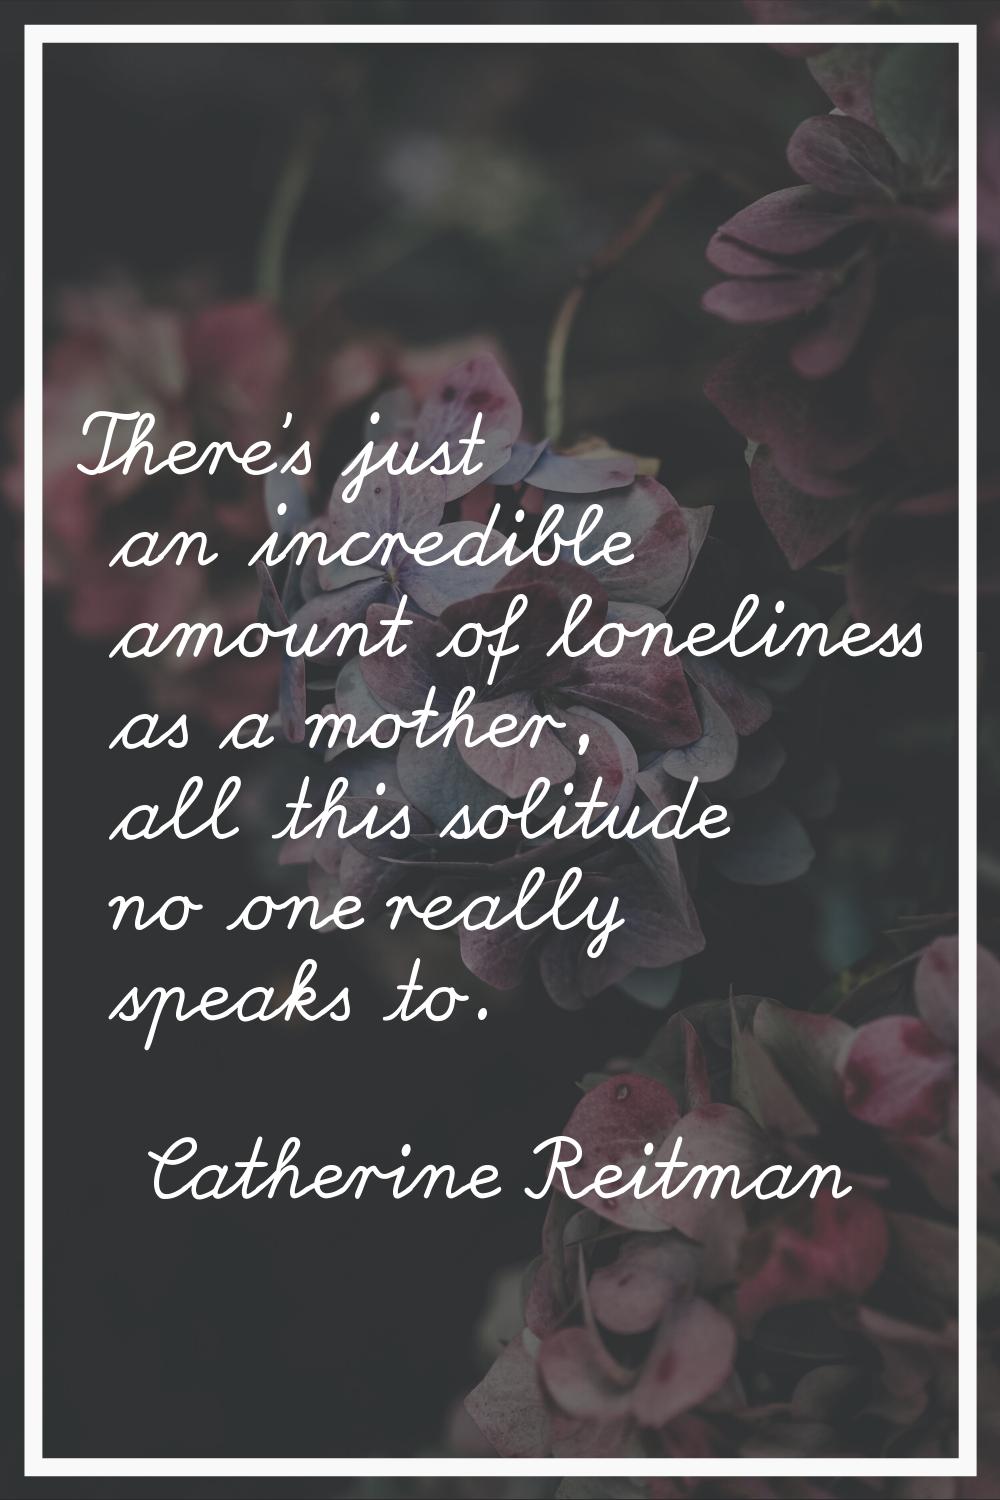 There's just an incredible amount of loneliness as a mother, all this solitude no one really speaks